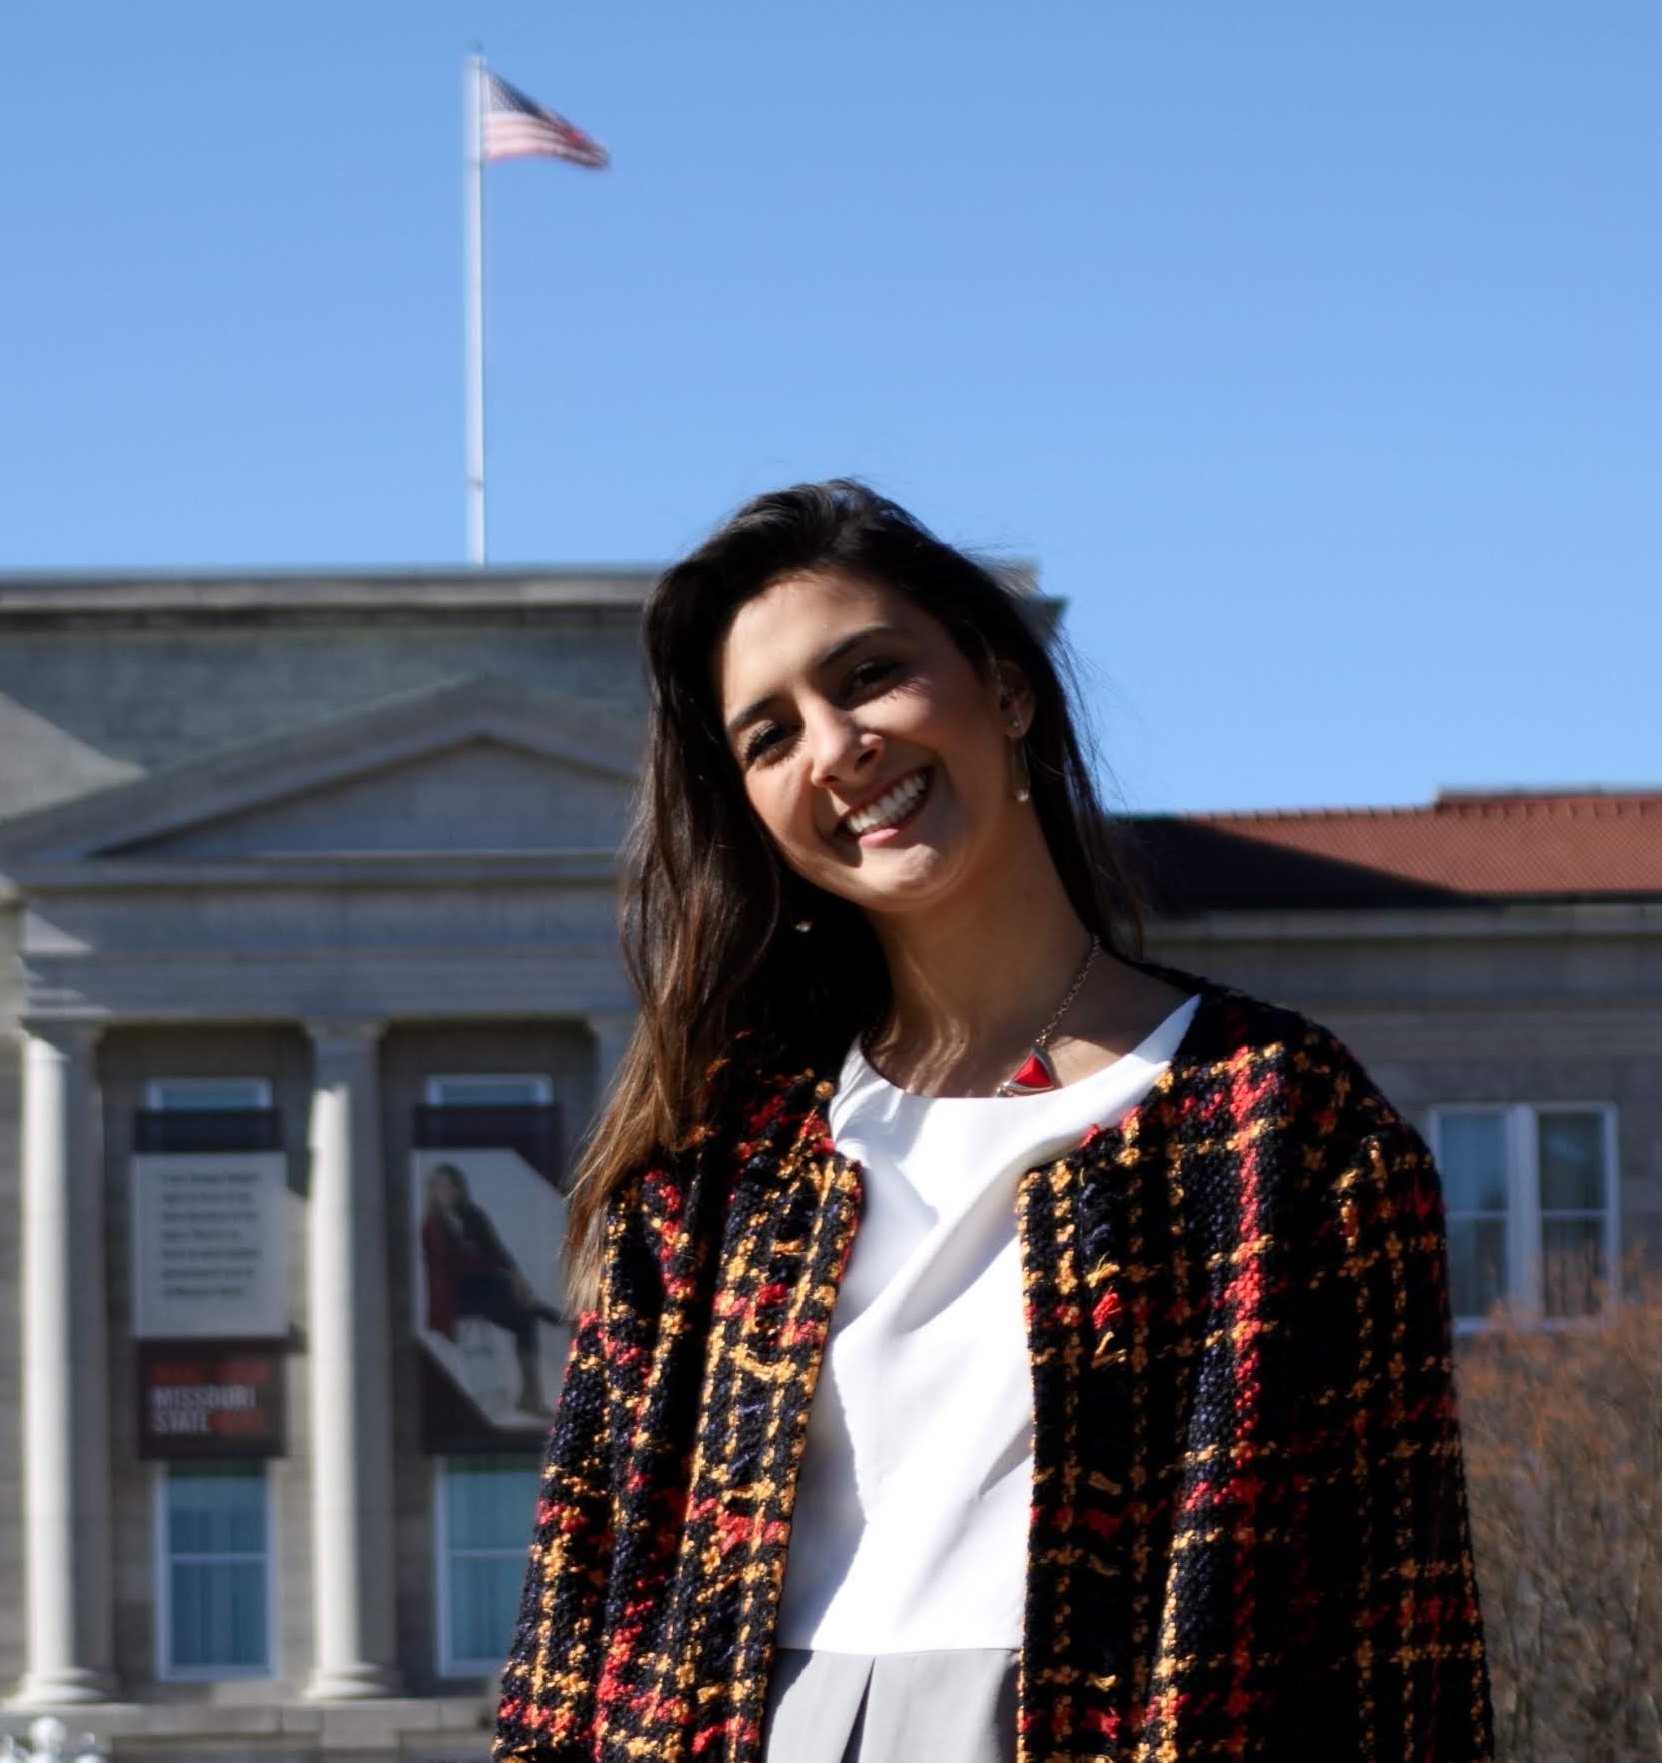 Woman smiling in front of academic building